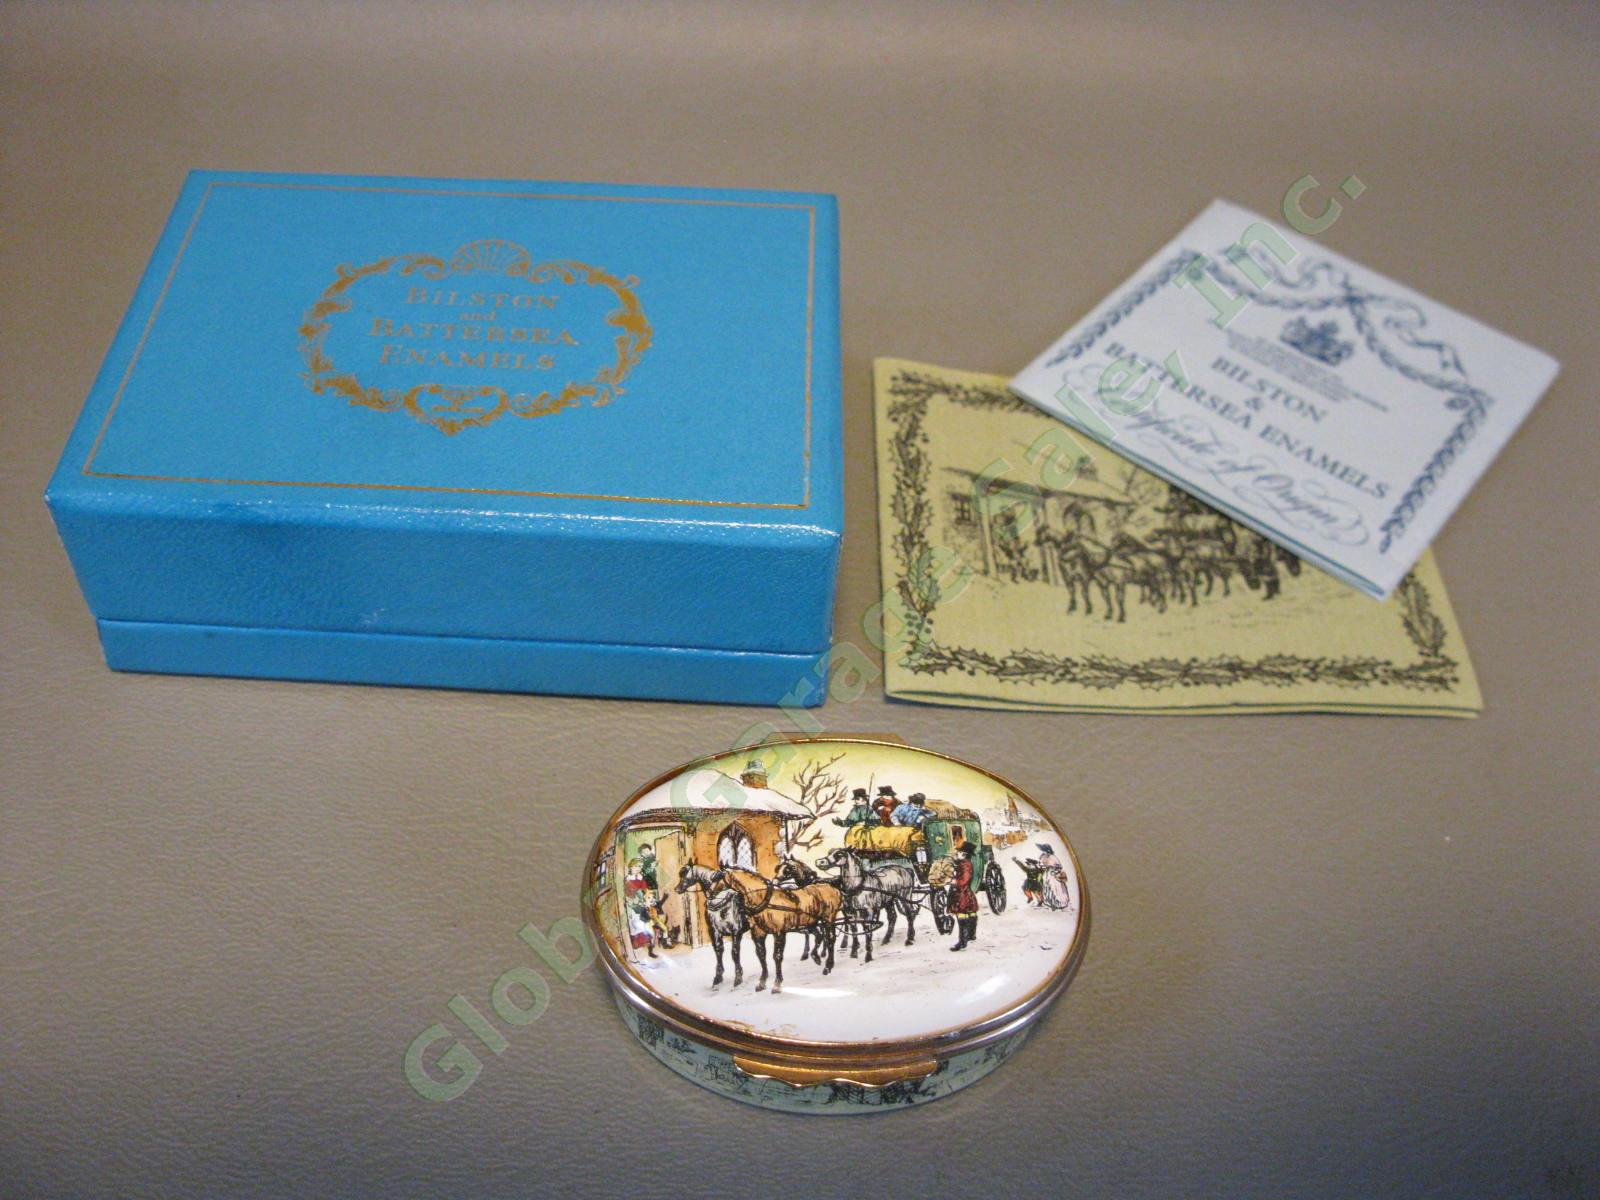 Limited Edition 1977 Halcyon Days Delivering Christmas Mail Enamel Trinket Box